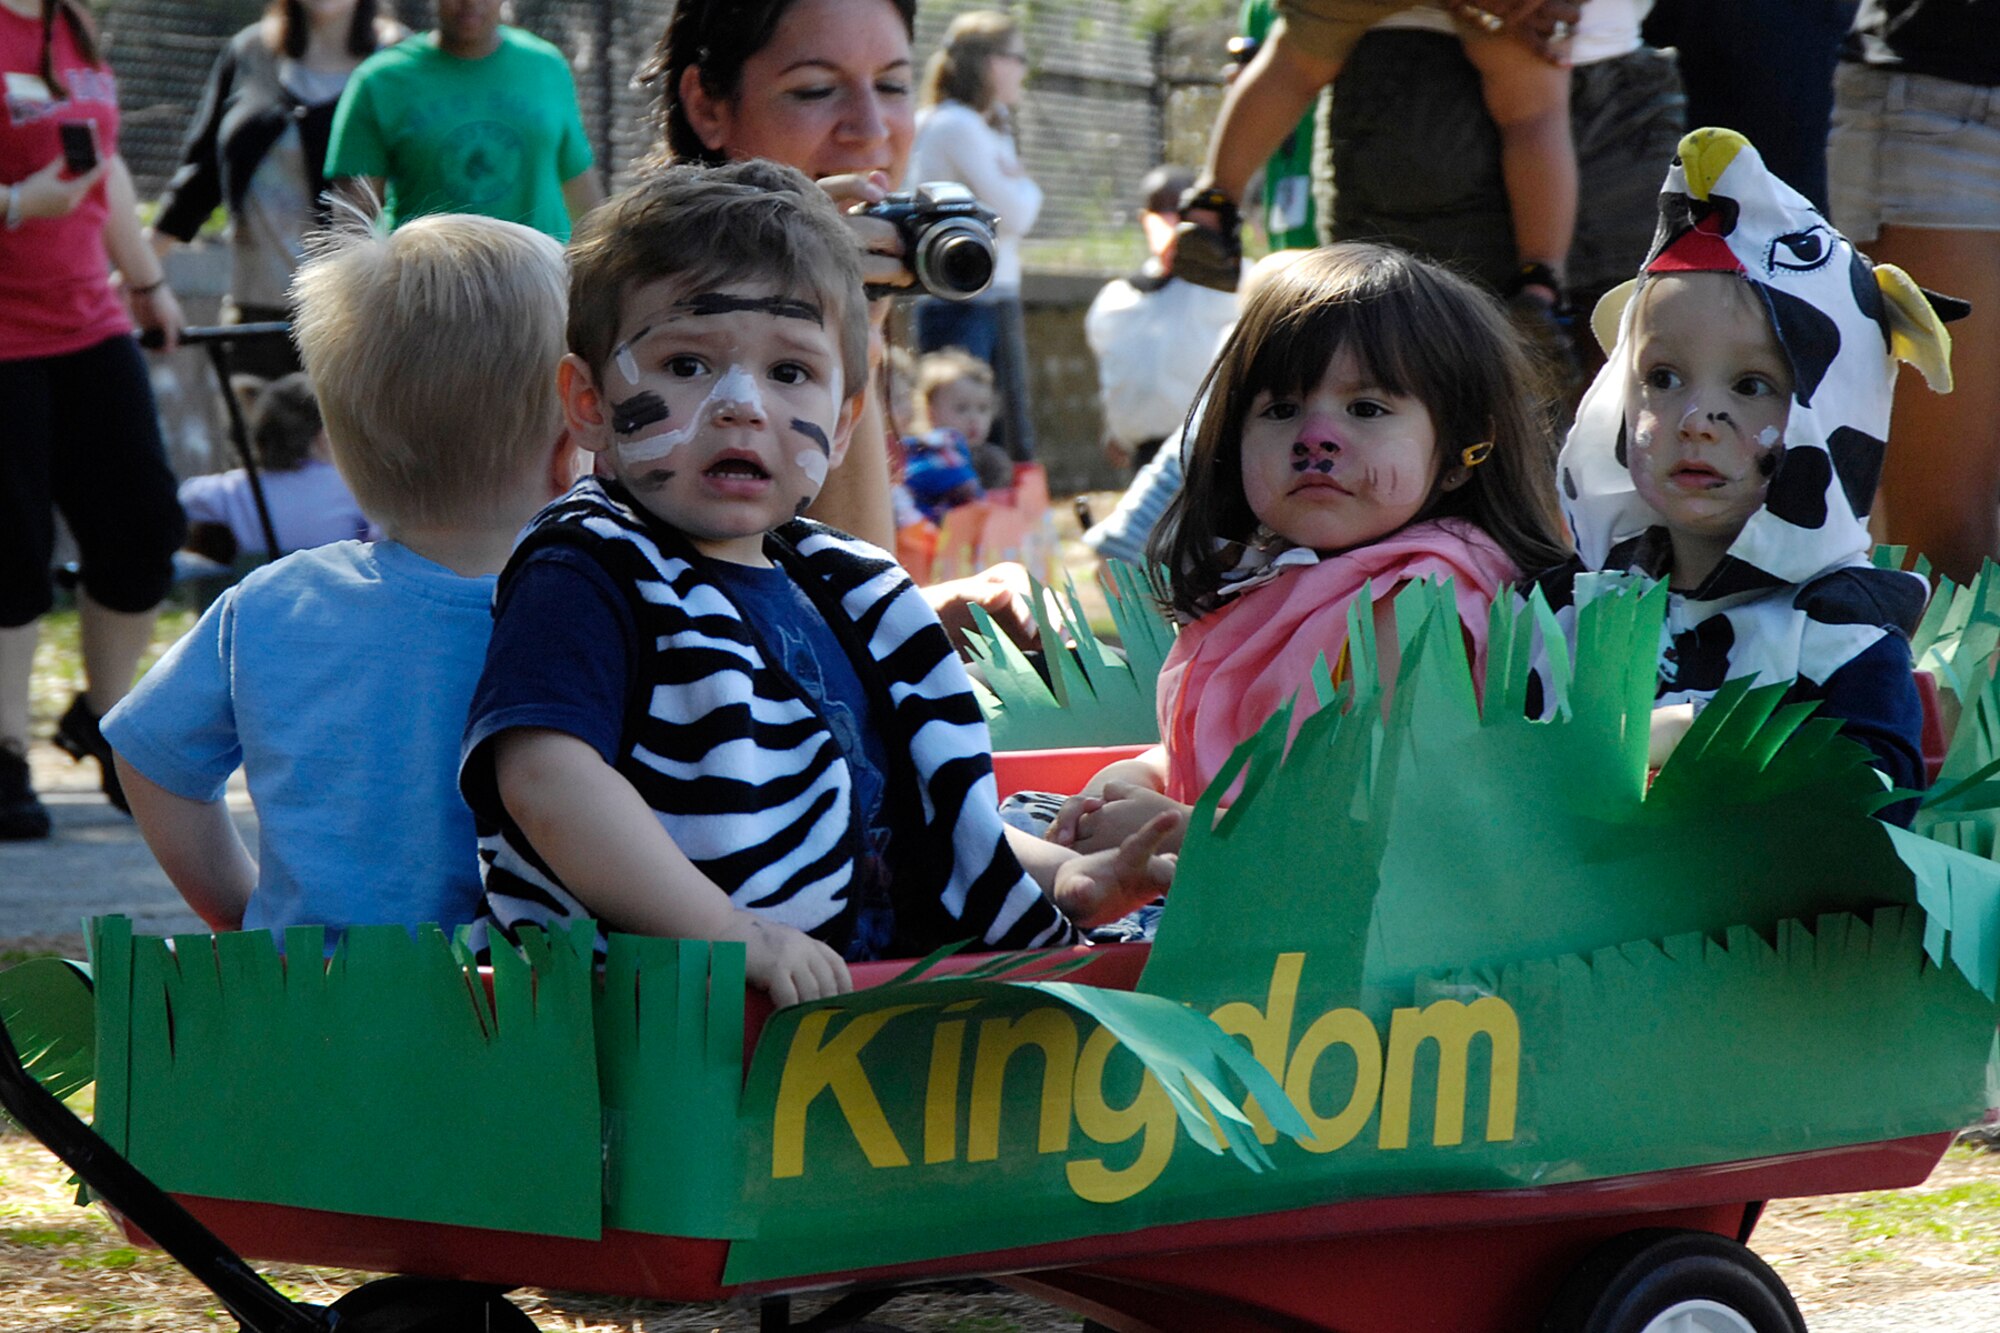 HANSCOM AIR FORCE BASE, Mass. – Hanscom Child Development Center children ride aboard their animal kingdom float during the Center’s Fantastic Floats parade, April 24. Pictured from left to right are Matthew Mann, Noah D’Olympia, Eva Sagredo and Adam Picariello. (U.S. Air Force photo by Linda LaBonte Britt)